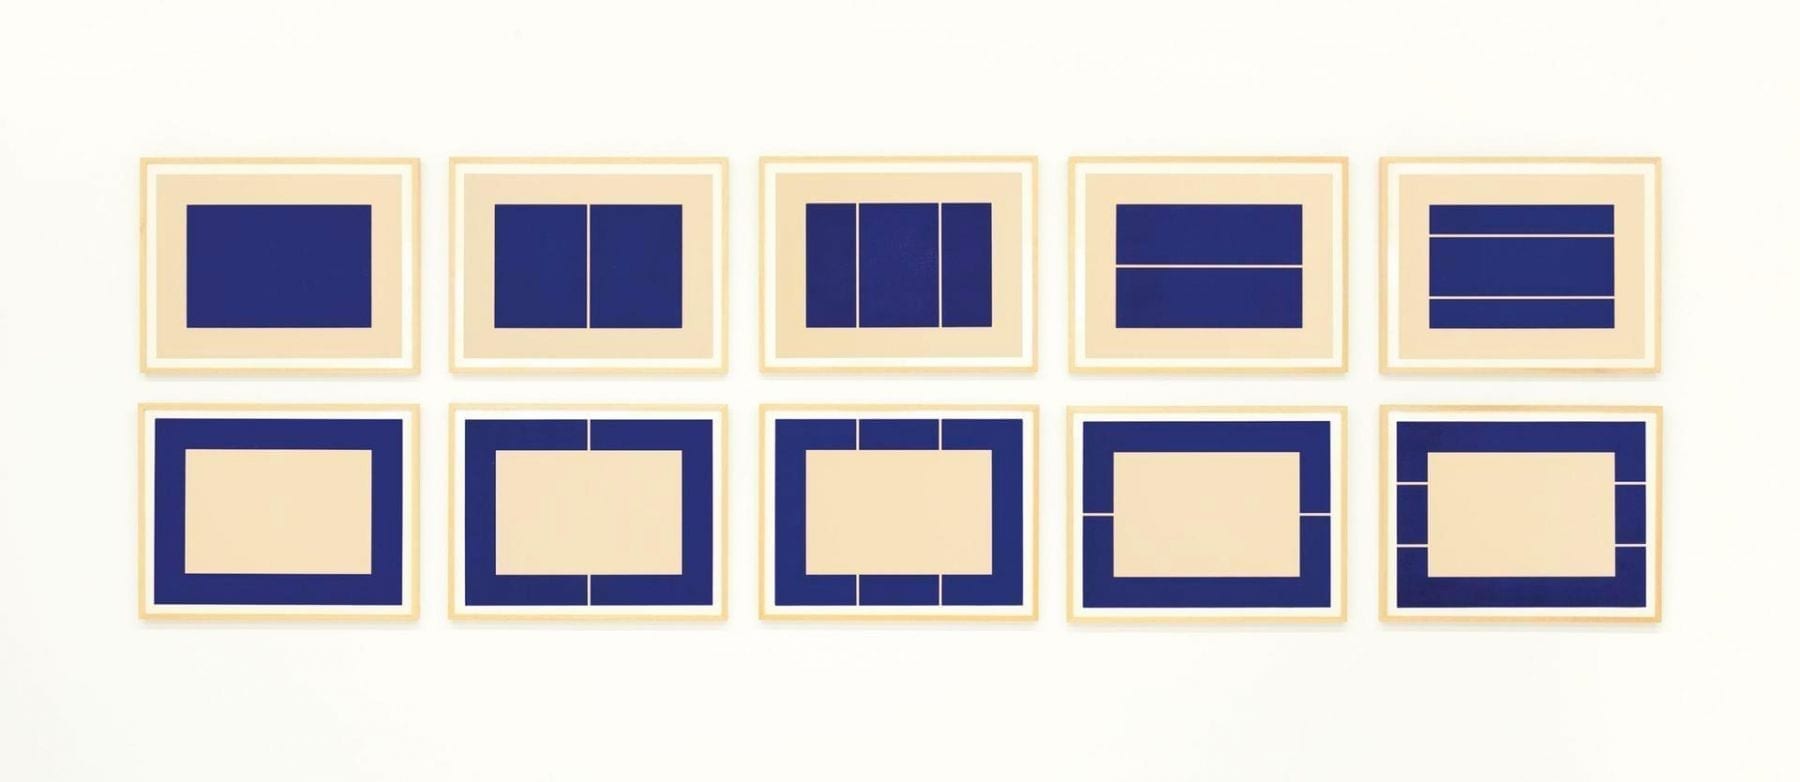 Untitled, 1988, the complete set of ten woodcuts by Donald Judd